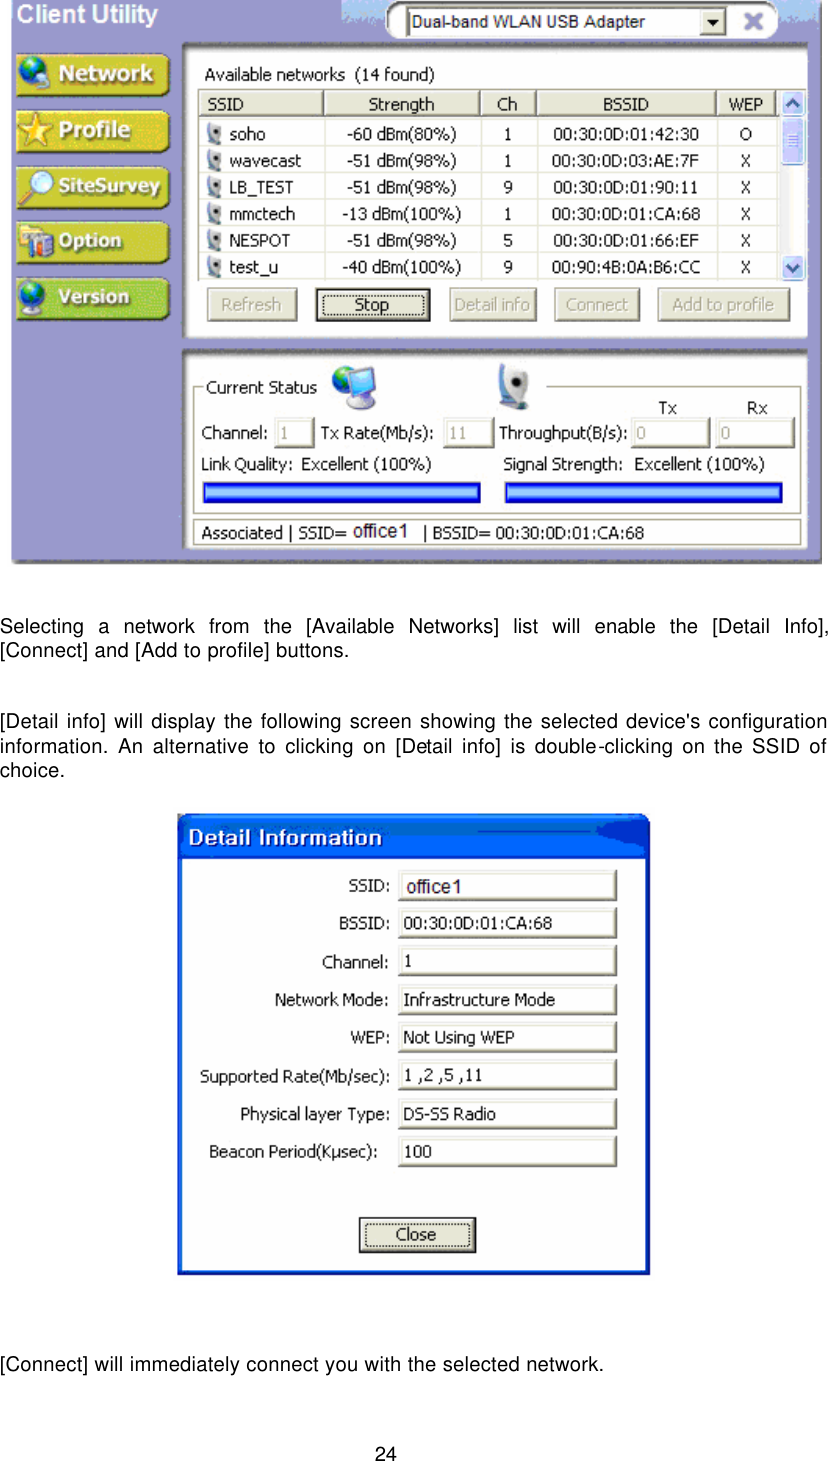  24       Selecting  a network from the [Available Networks] list will enable the [Detail Info], [Connect] and [Add to profile] buttons.   [Detail info] will display the following screen showing the selected device&apos;s configuration information. An alternative to clicking on [Detail info] is double-clicking on the SSID of choice.        [Connect] will immediately connect you with the selected network. 